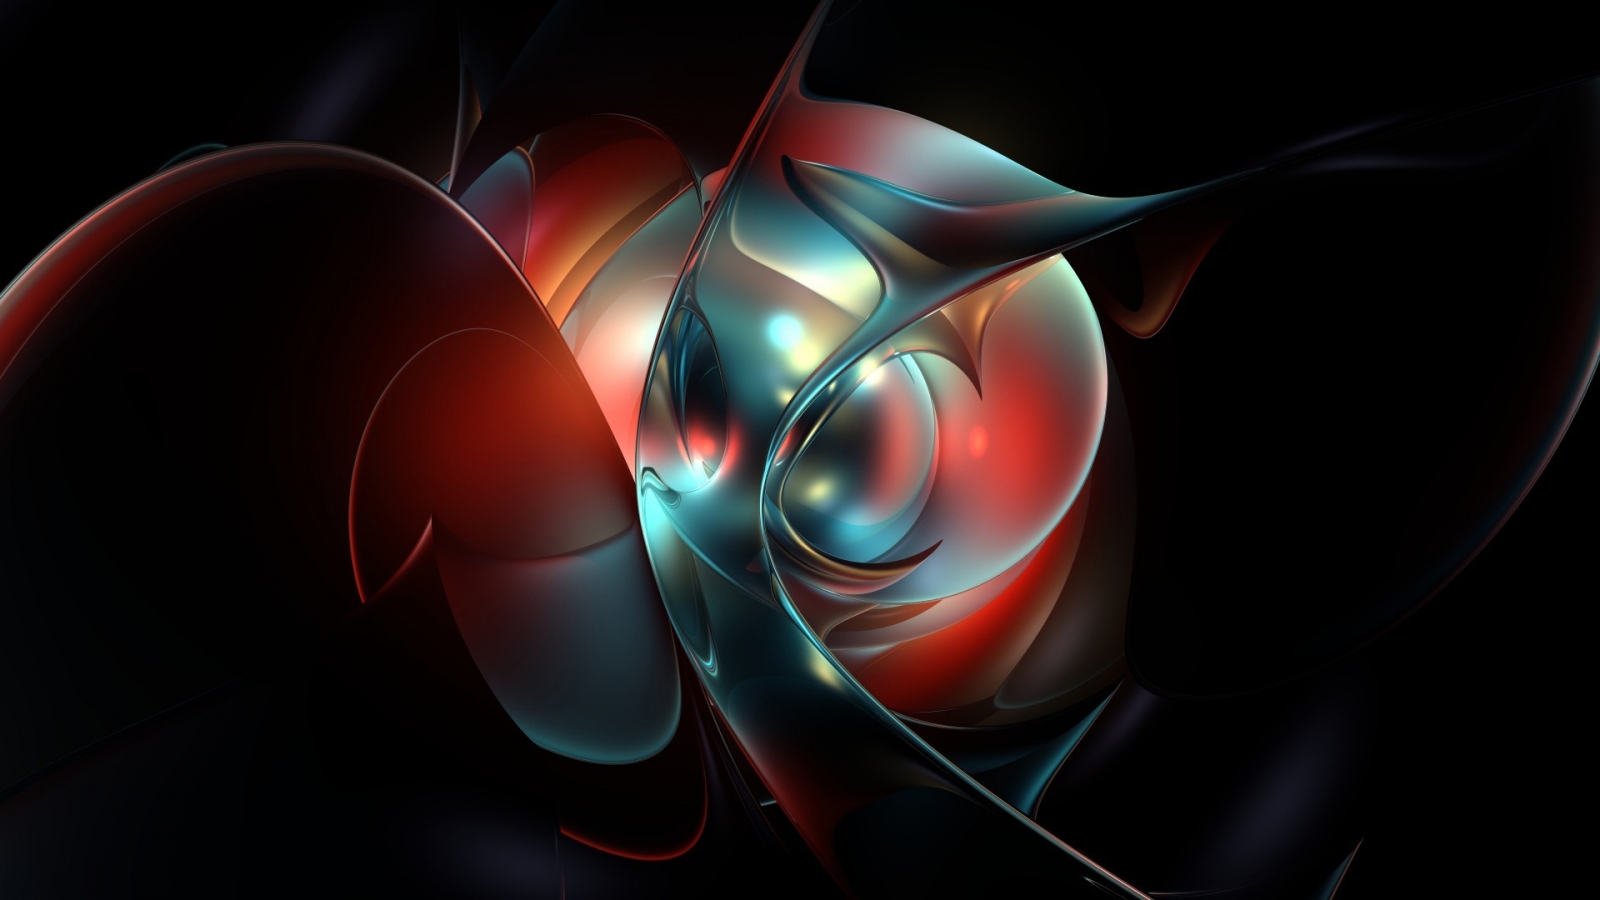 Abstract Geometric Shapes for 1600 x 900 HDTV resolution